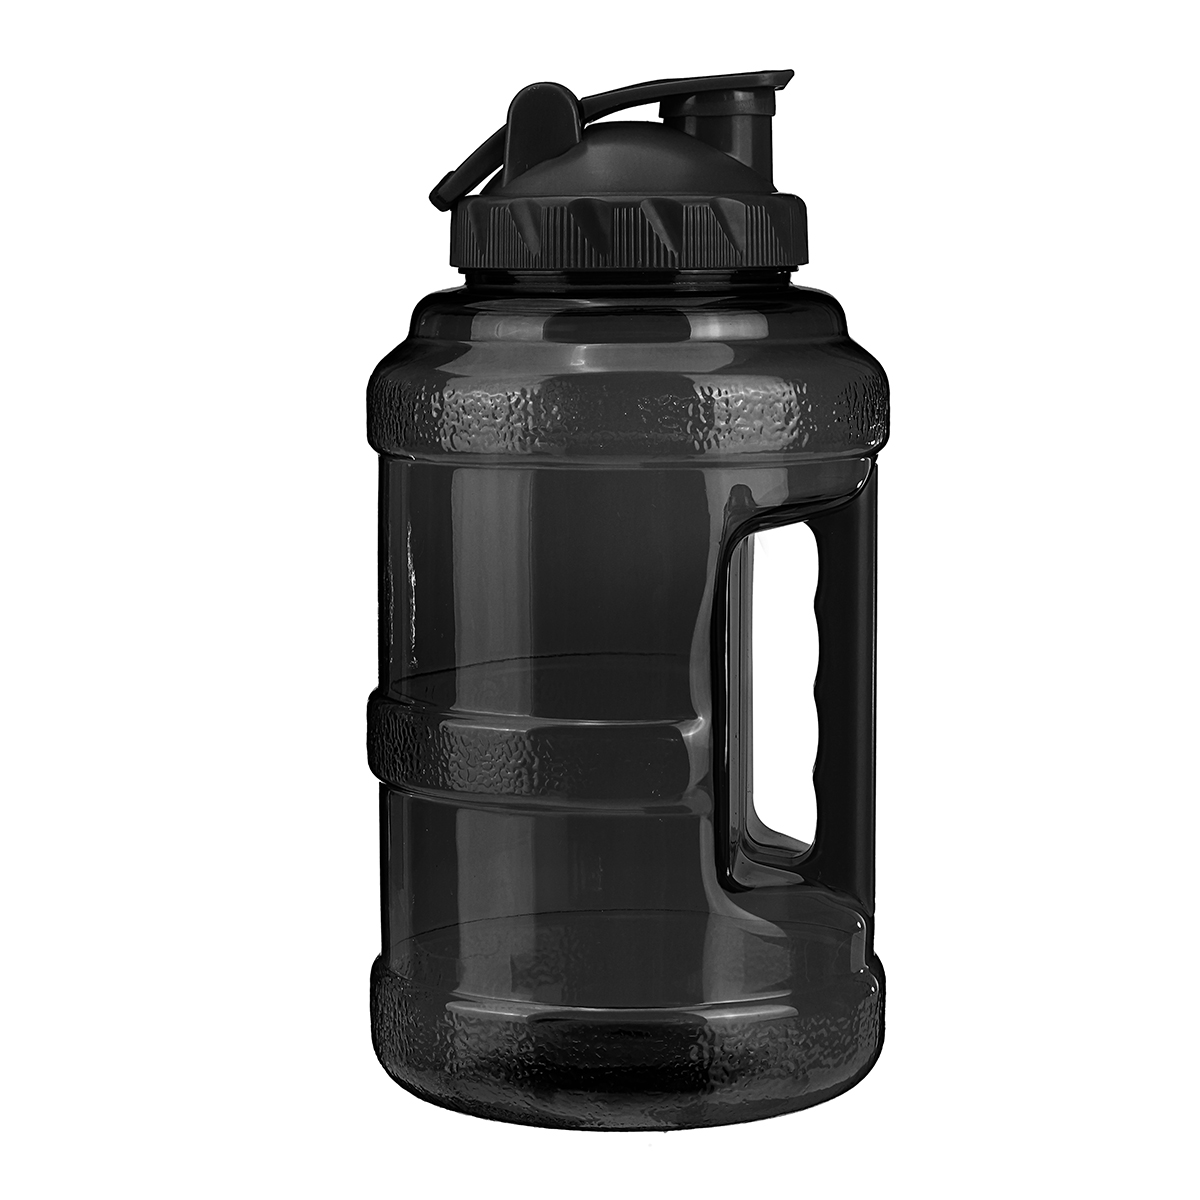 25L-Large-Capacity-Sports-Water-Bottle-with-Handle-PET-Portable-Bucket-Cup-Outdoor-Sports-Fitness-Cu-1898505-13